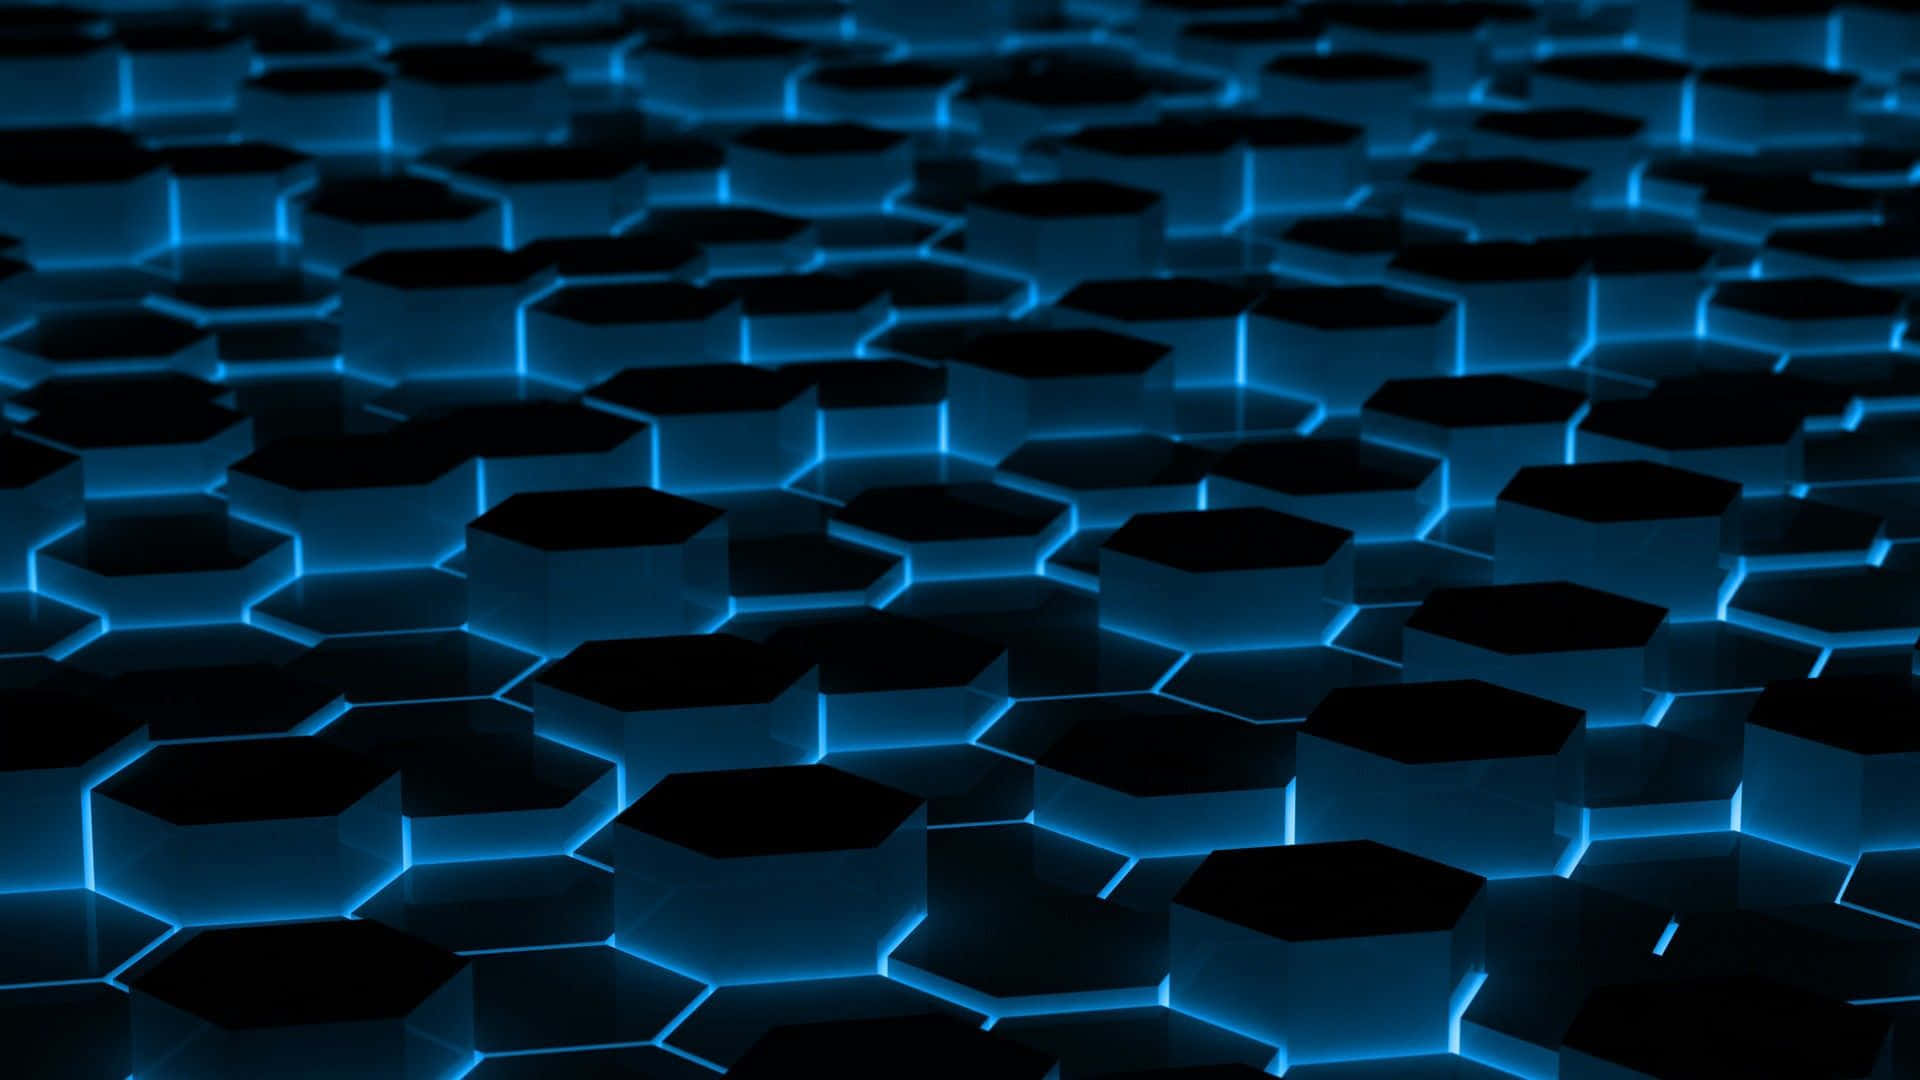 A Blue Hexagonal Background With Blue Lights